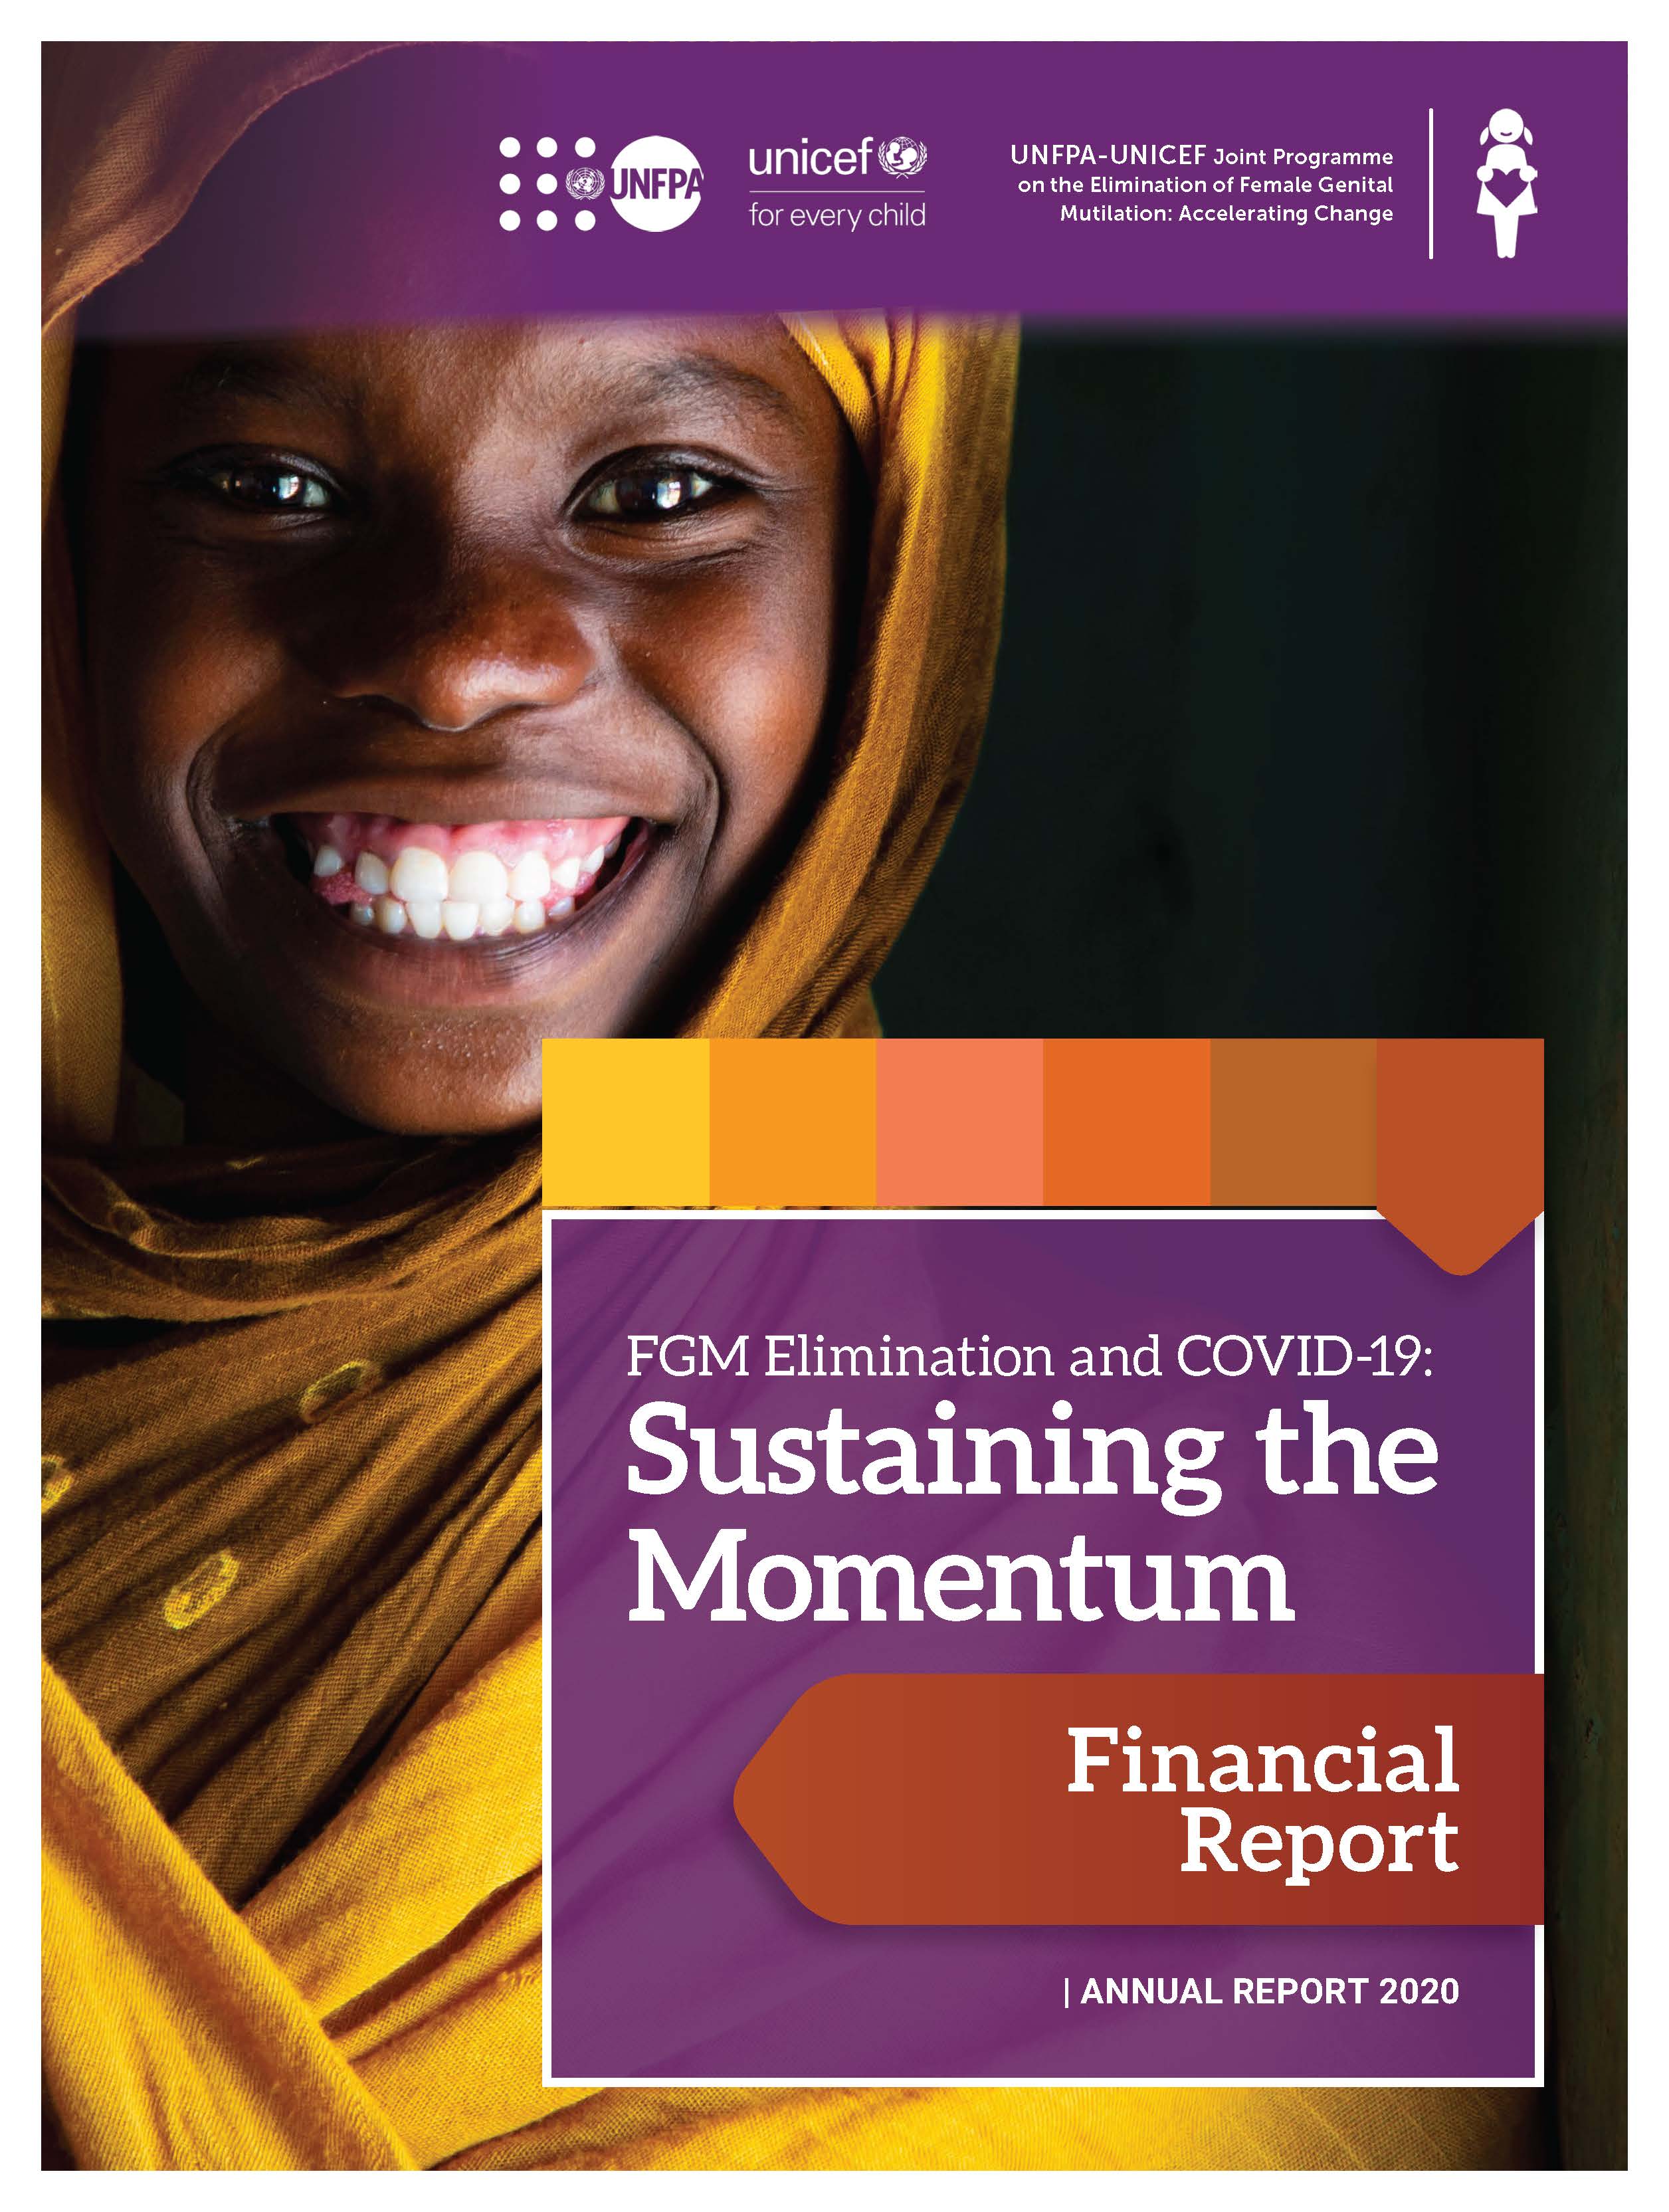 2020 Annual Report on FGM - The Financial Report